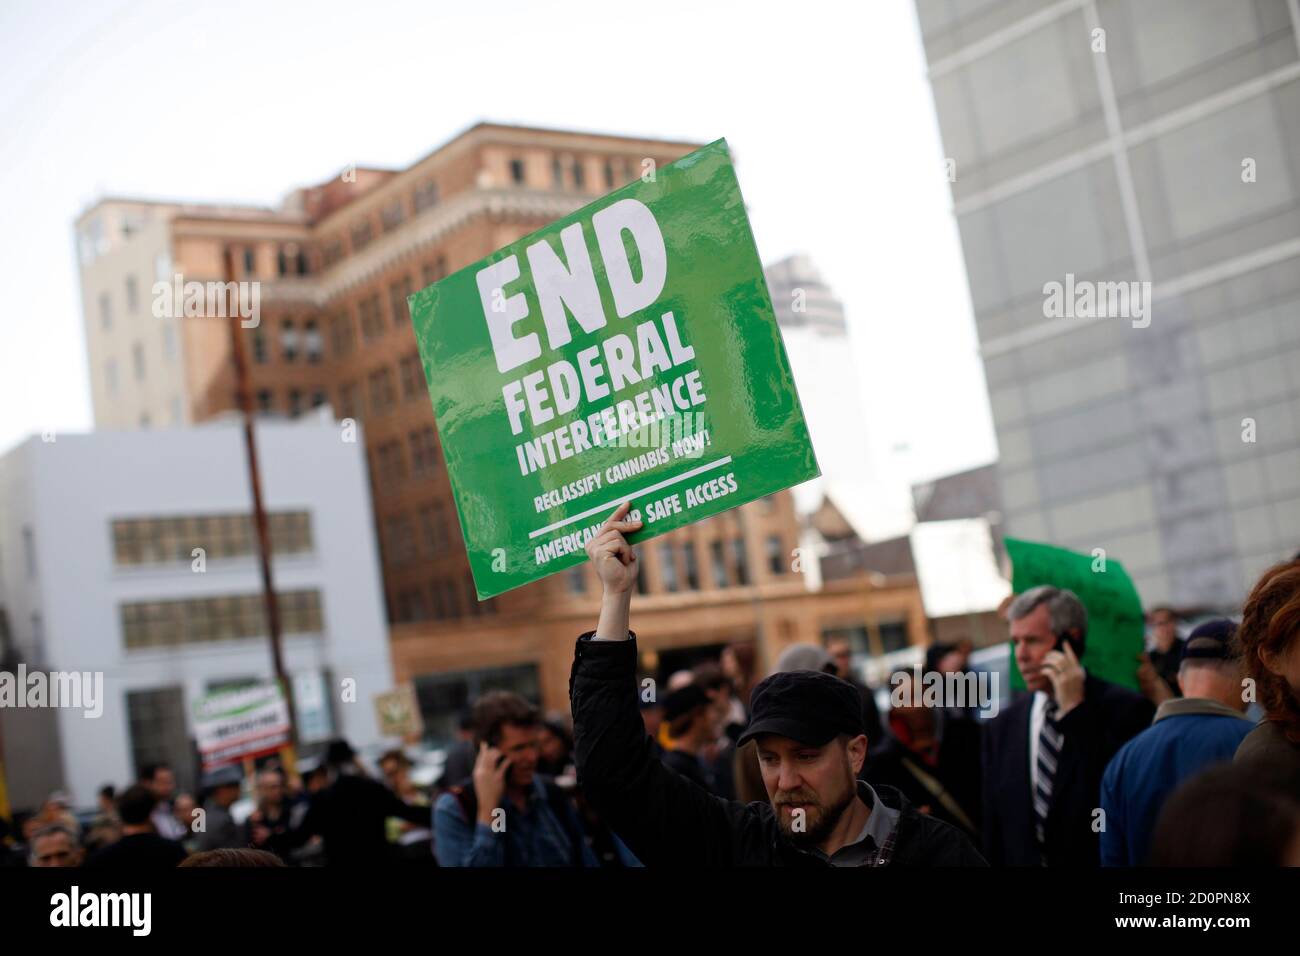 Roger LaChance of Oakland holds a sign in protest as federal agents conduct a raid on Oaksterdam University, a cannabis cultivation college, in Oakland, California April 2, 2012. Federal agents raided a cannabis cultivation college on Monday in the San Francisco Bay area widely known as the 'Princeton of Pot' and the 'Harvard of Hemp,' authorities said, as the U.S. government pressed its clamp-down on medical marijuana.  REUTERS/Stephen Lam (UNITED STATES - Tags: CRIME LAW DRUGS SOCIETY CIVIL UNREST) Stock Photo